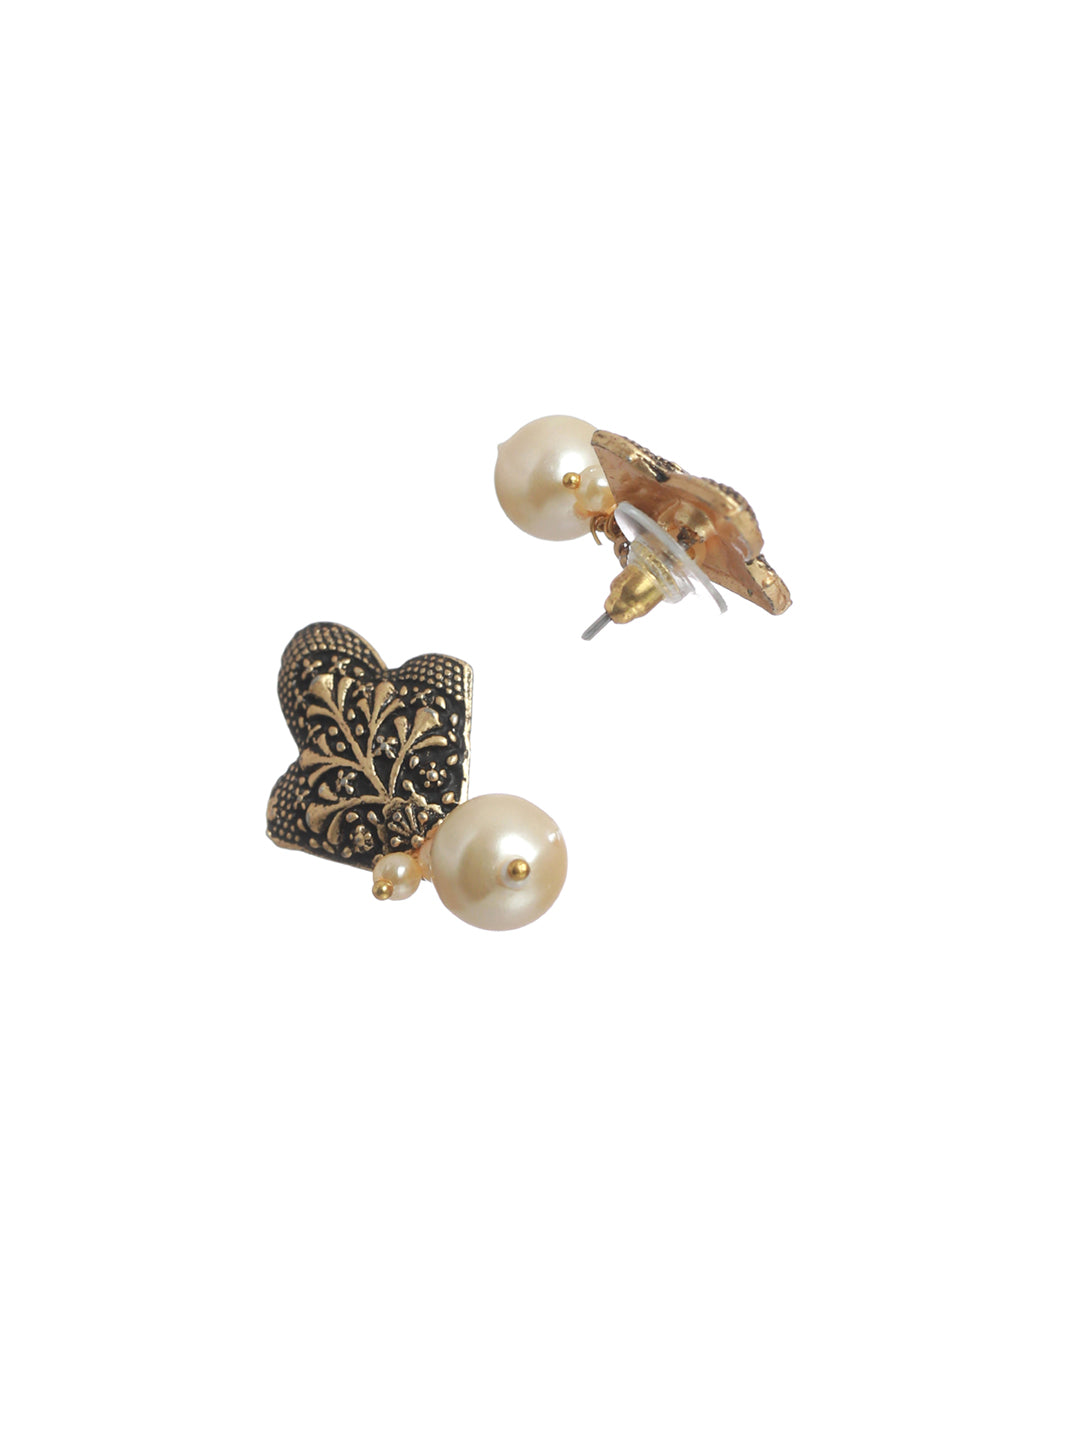 Studded Floral Gold Plated Earring Set of 3 - NOZ2TOZ